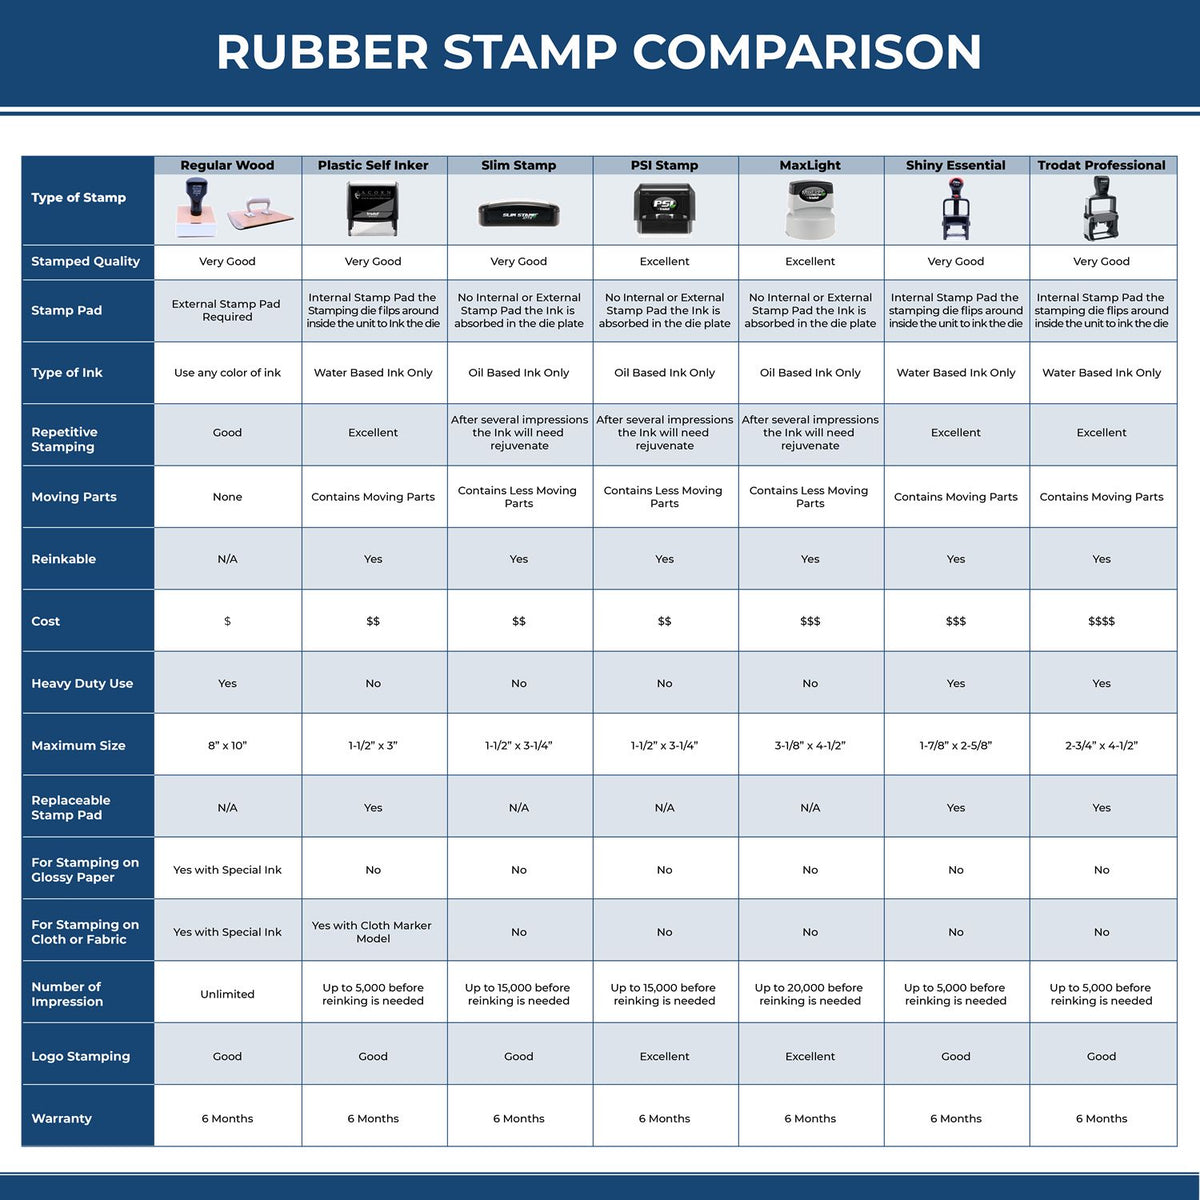 A comparison chart for the different types of mount models available for the Wooden Handle Idaho Rectangular Notary Public Stamp.